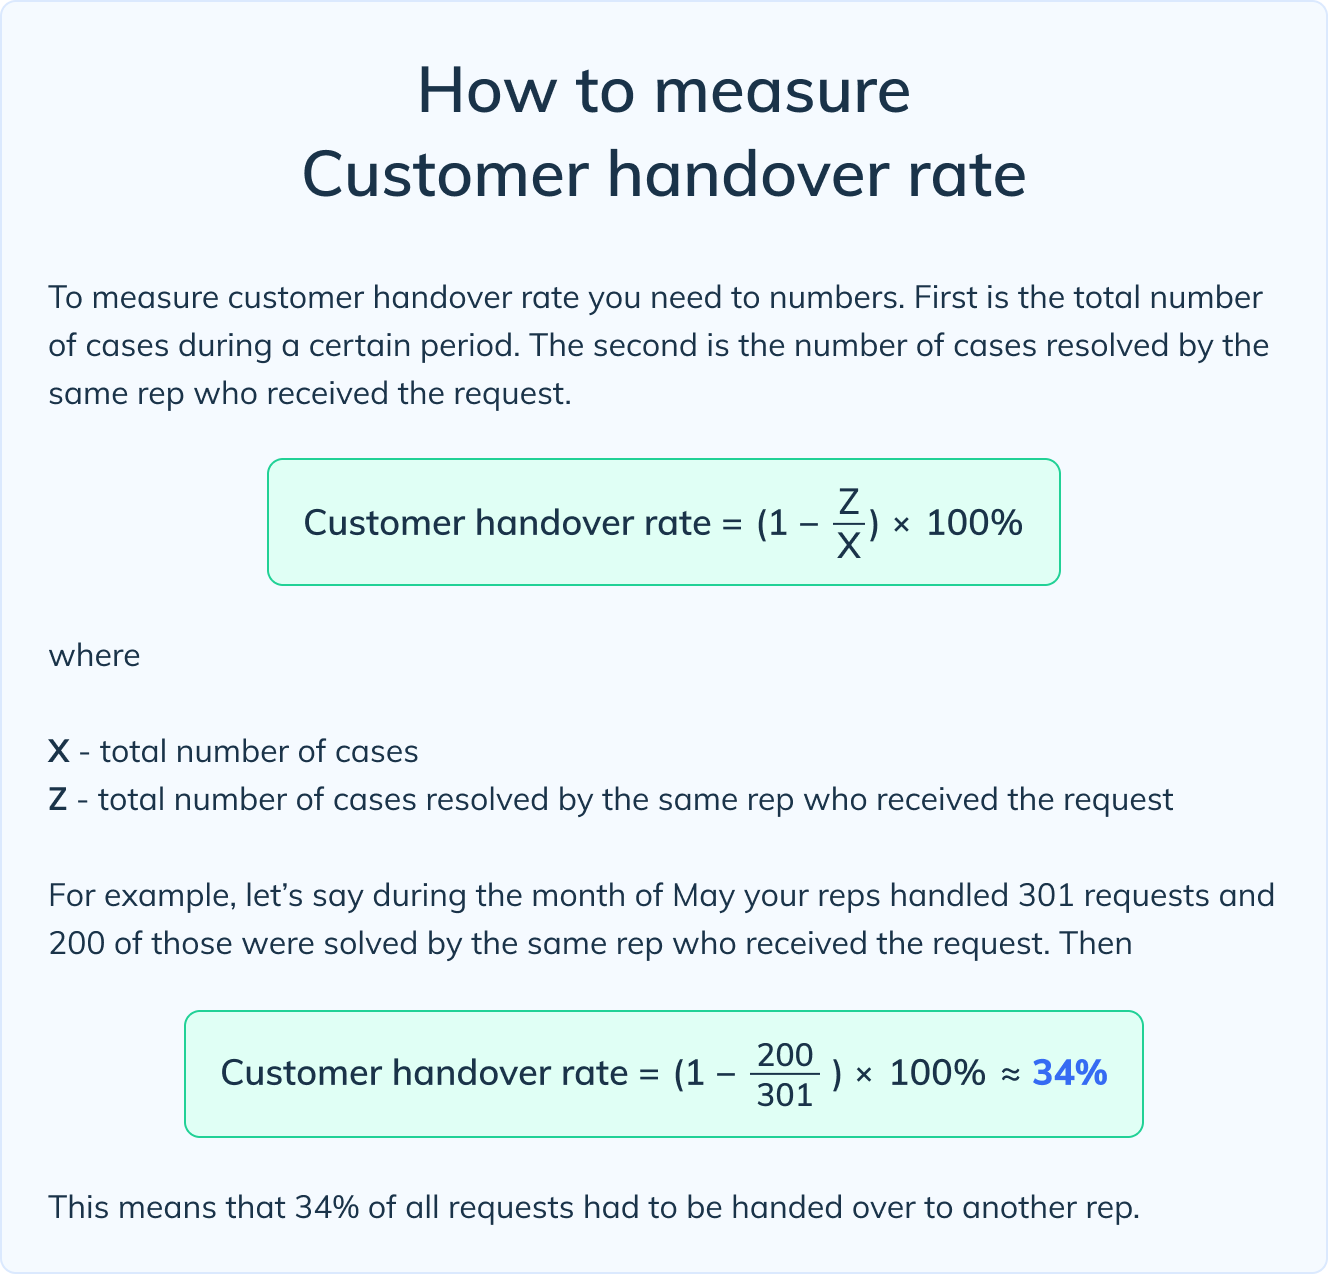 How to measure Customer handover rate